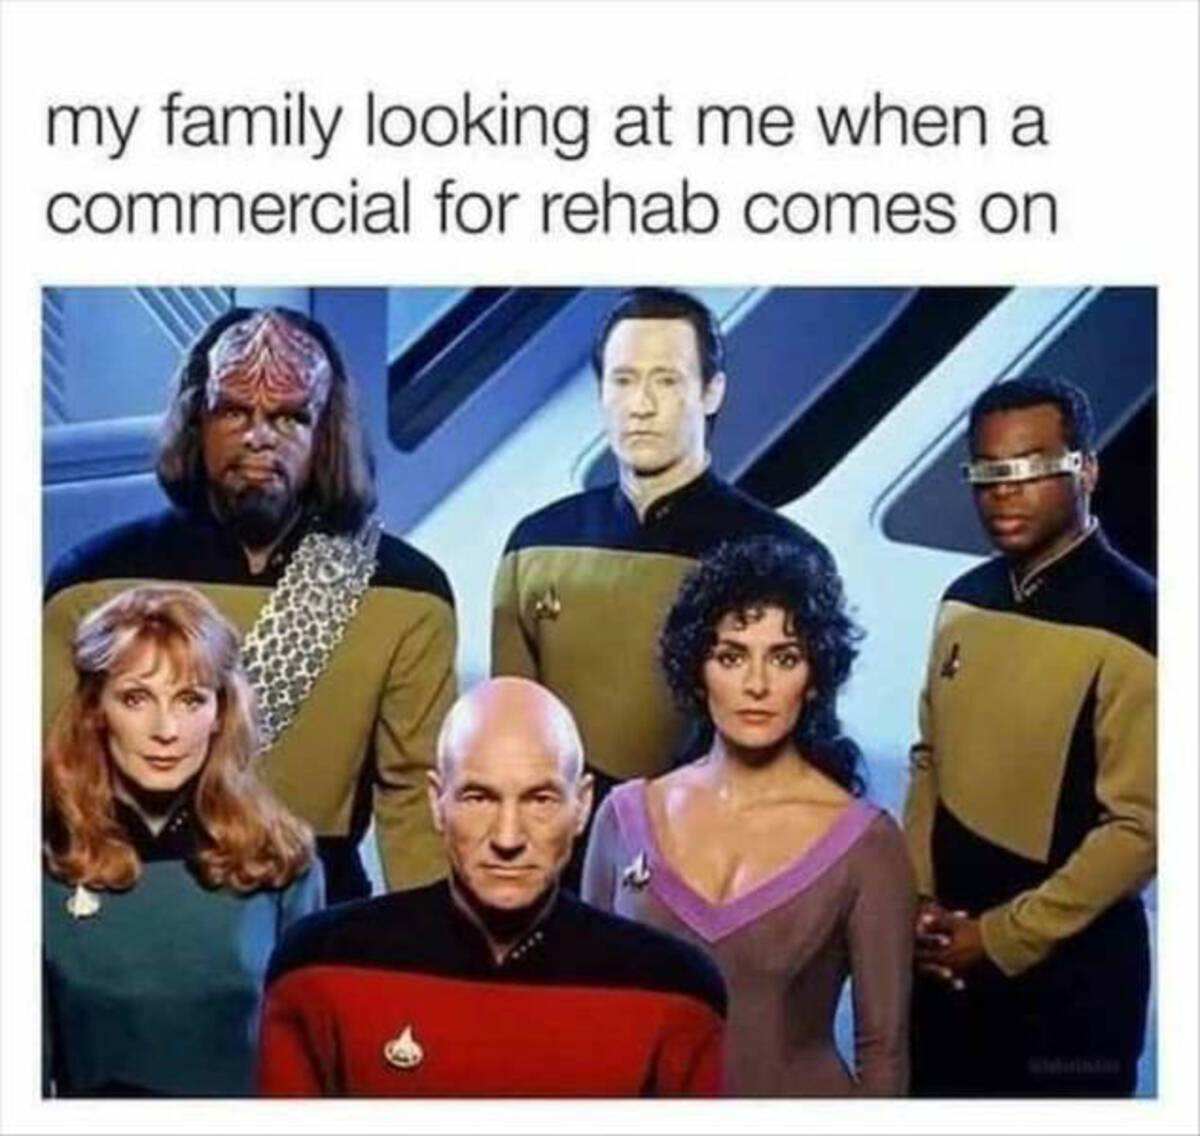 star trek team - my family looking at me when a commercial for rehab comes on